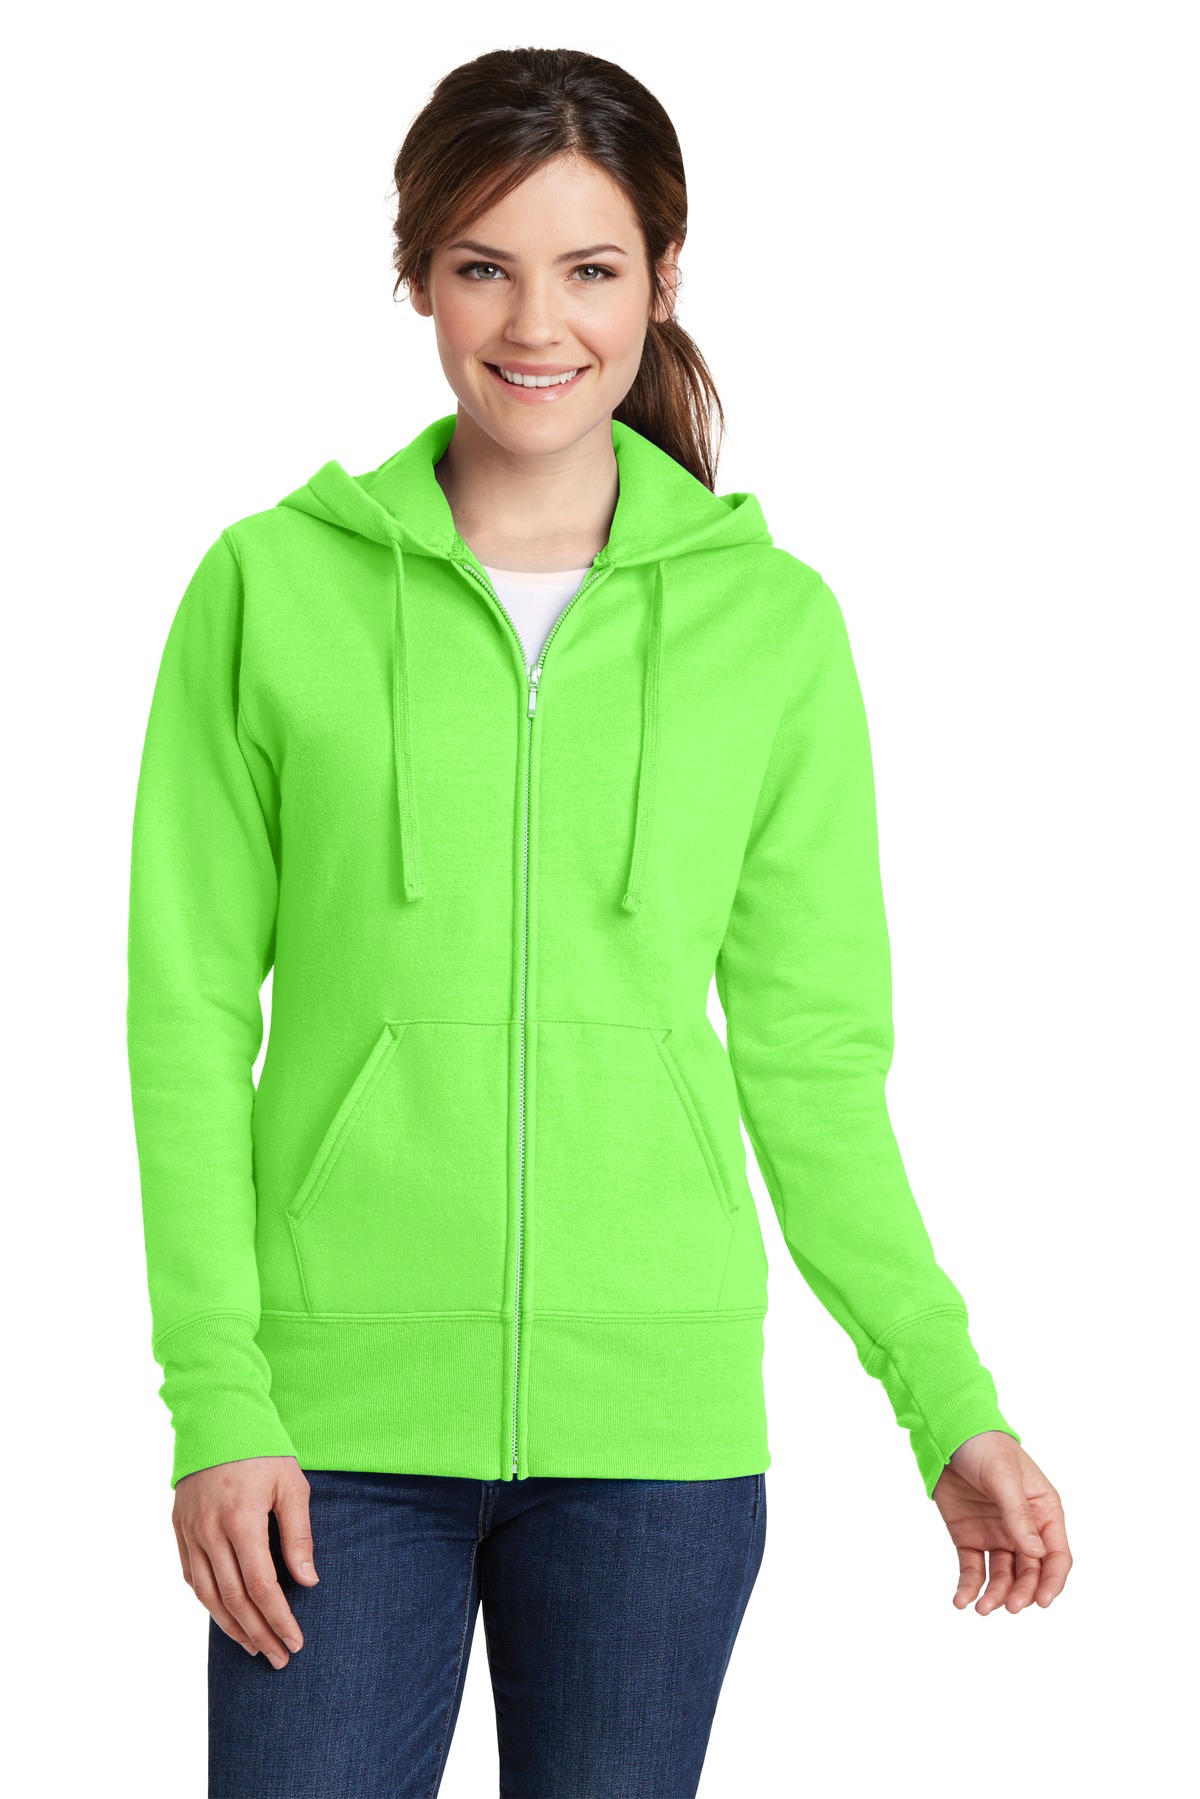 click to view Neon Green